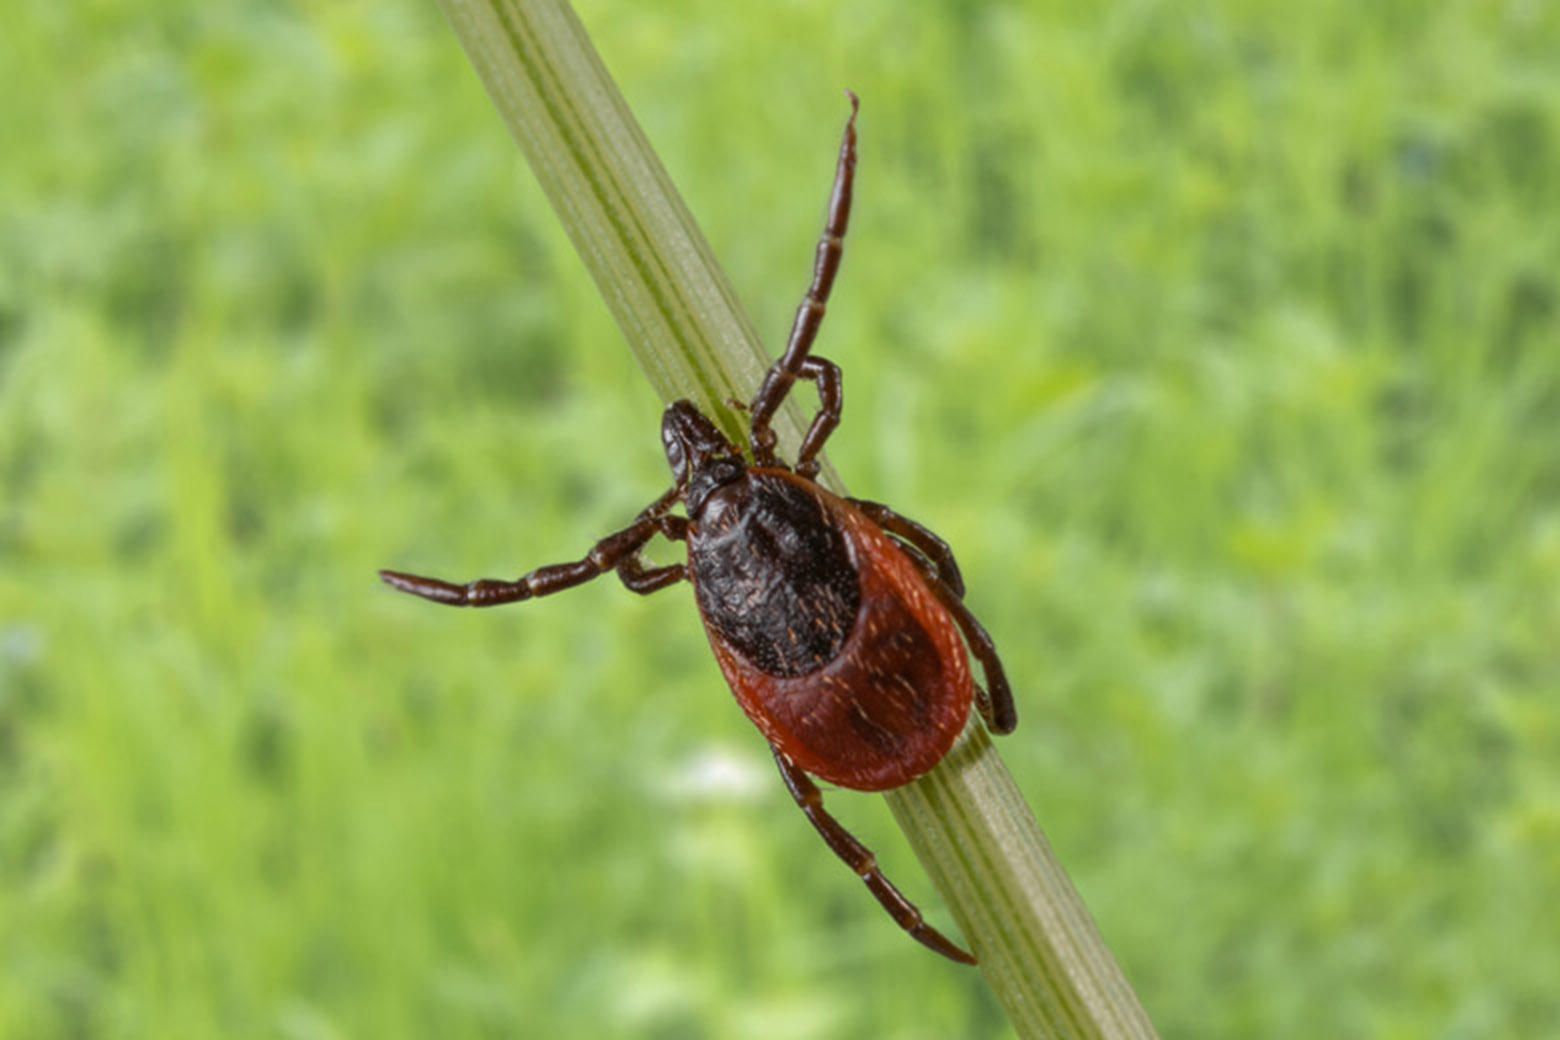 A tick most resembles a small spider and lives at different levels in the vegetation.